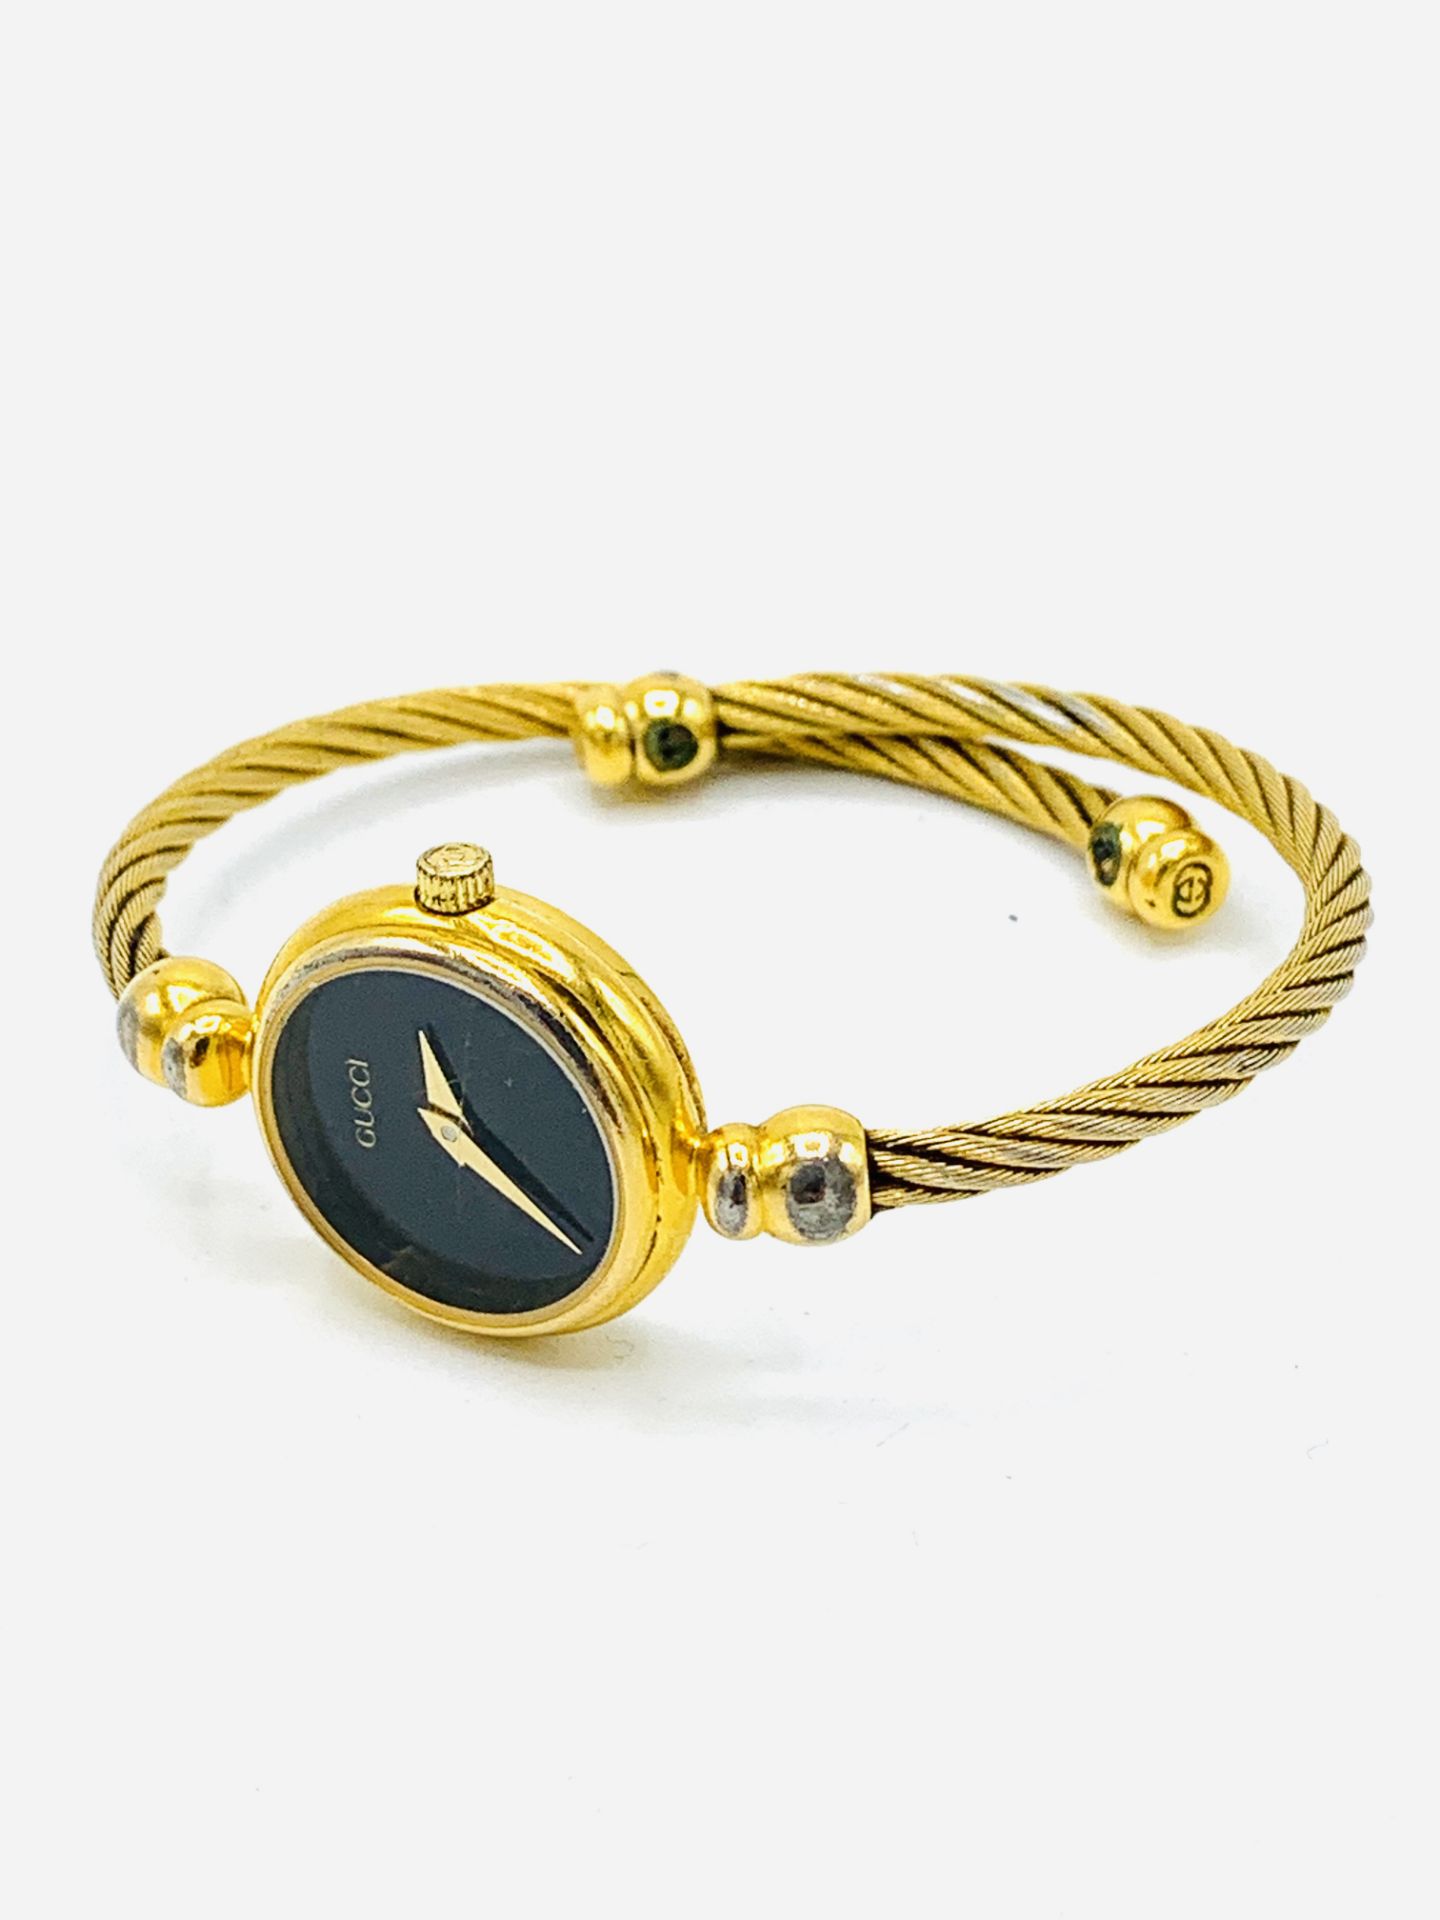 Gucci gold plate case watch with bangle strap, no. 2700.2.L